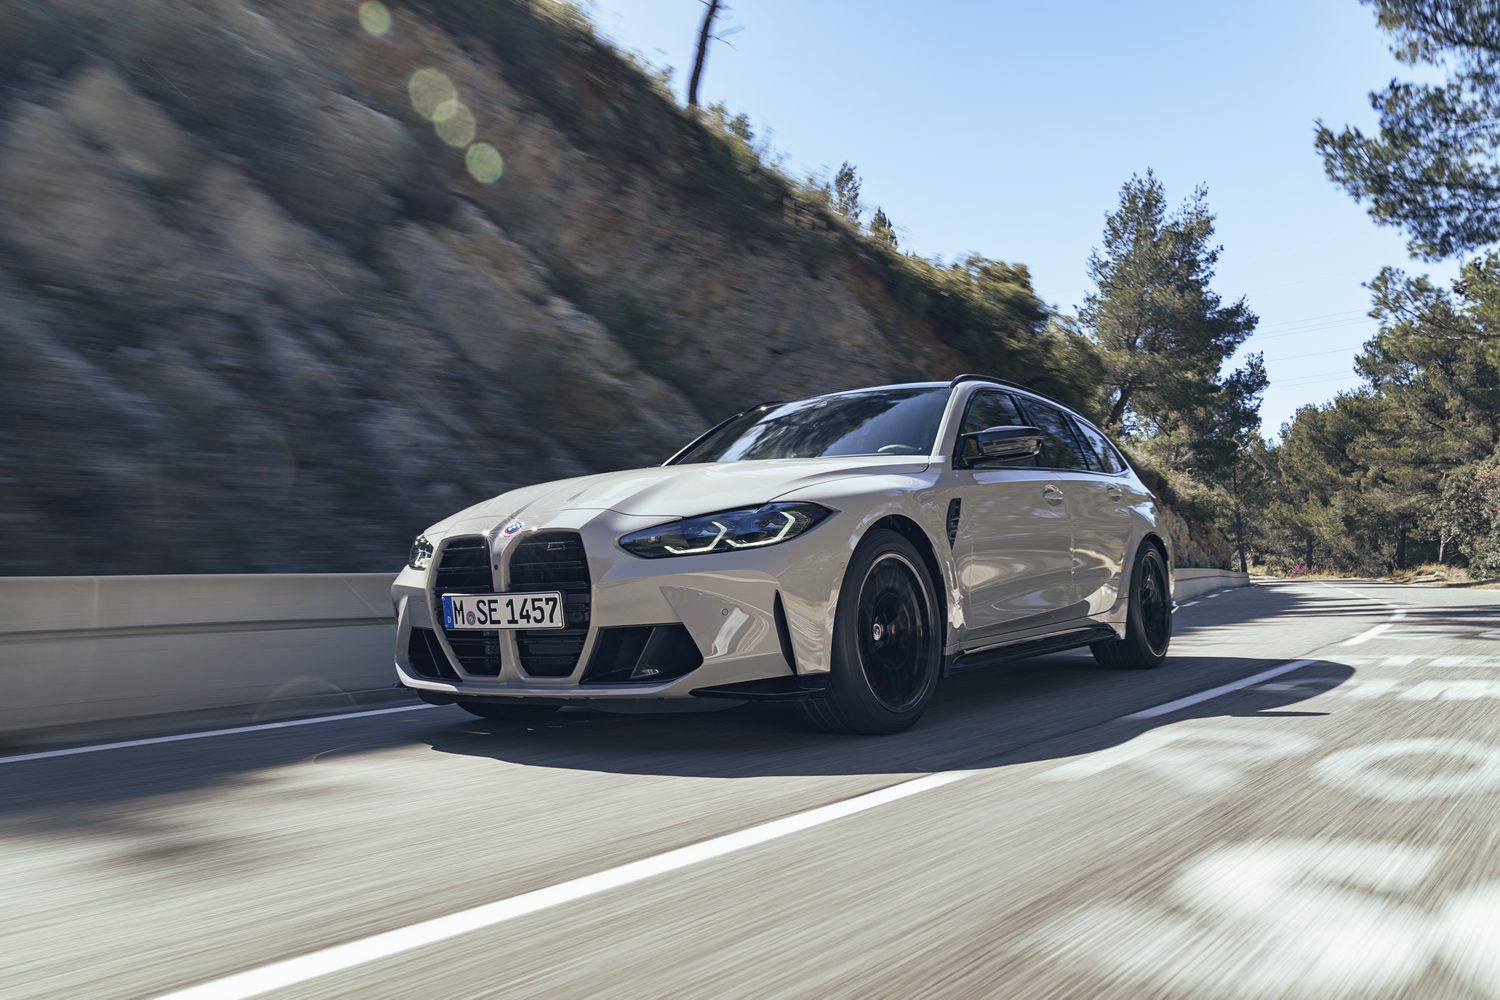 BMW M3 Touring in all its glory